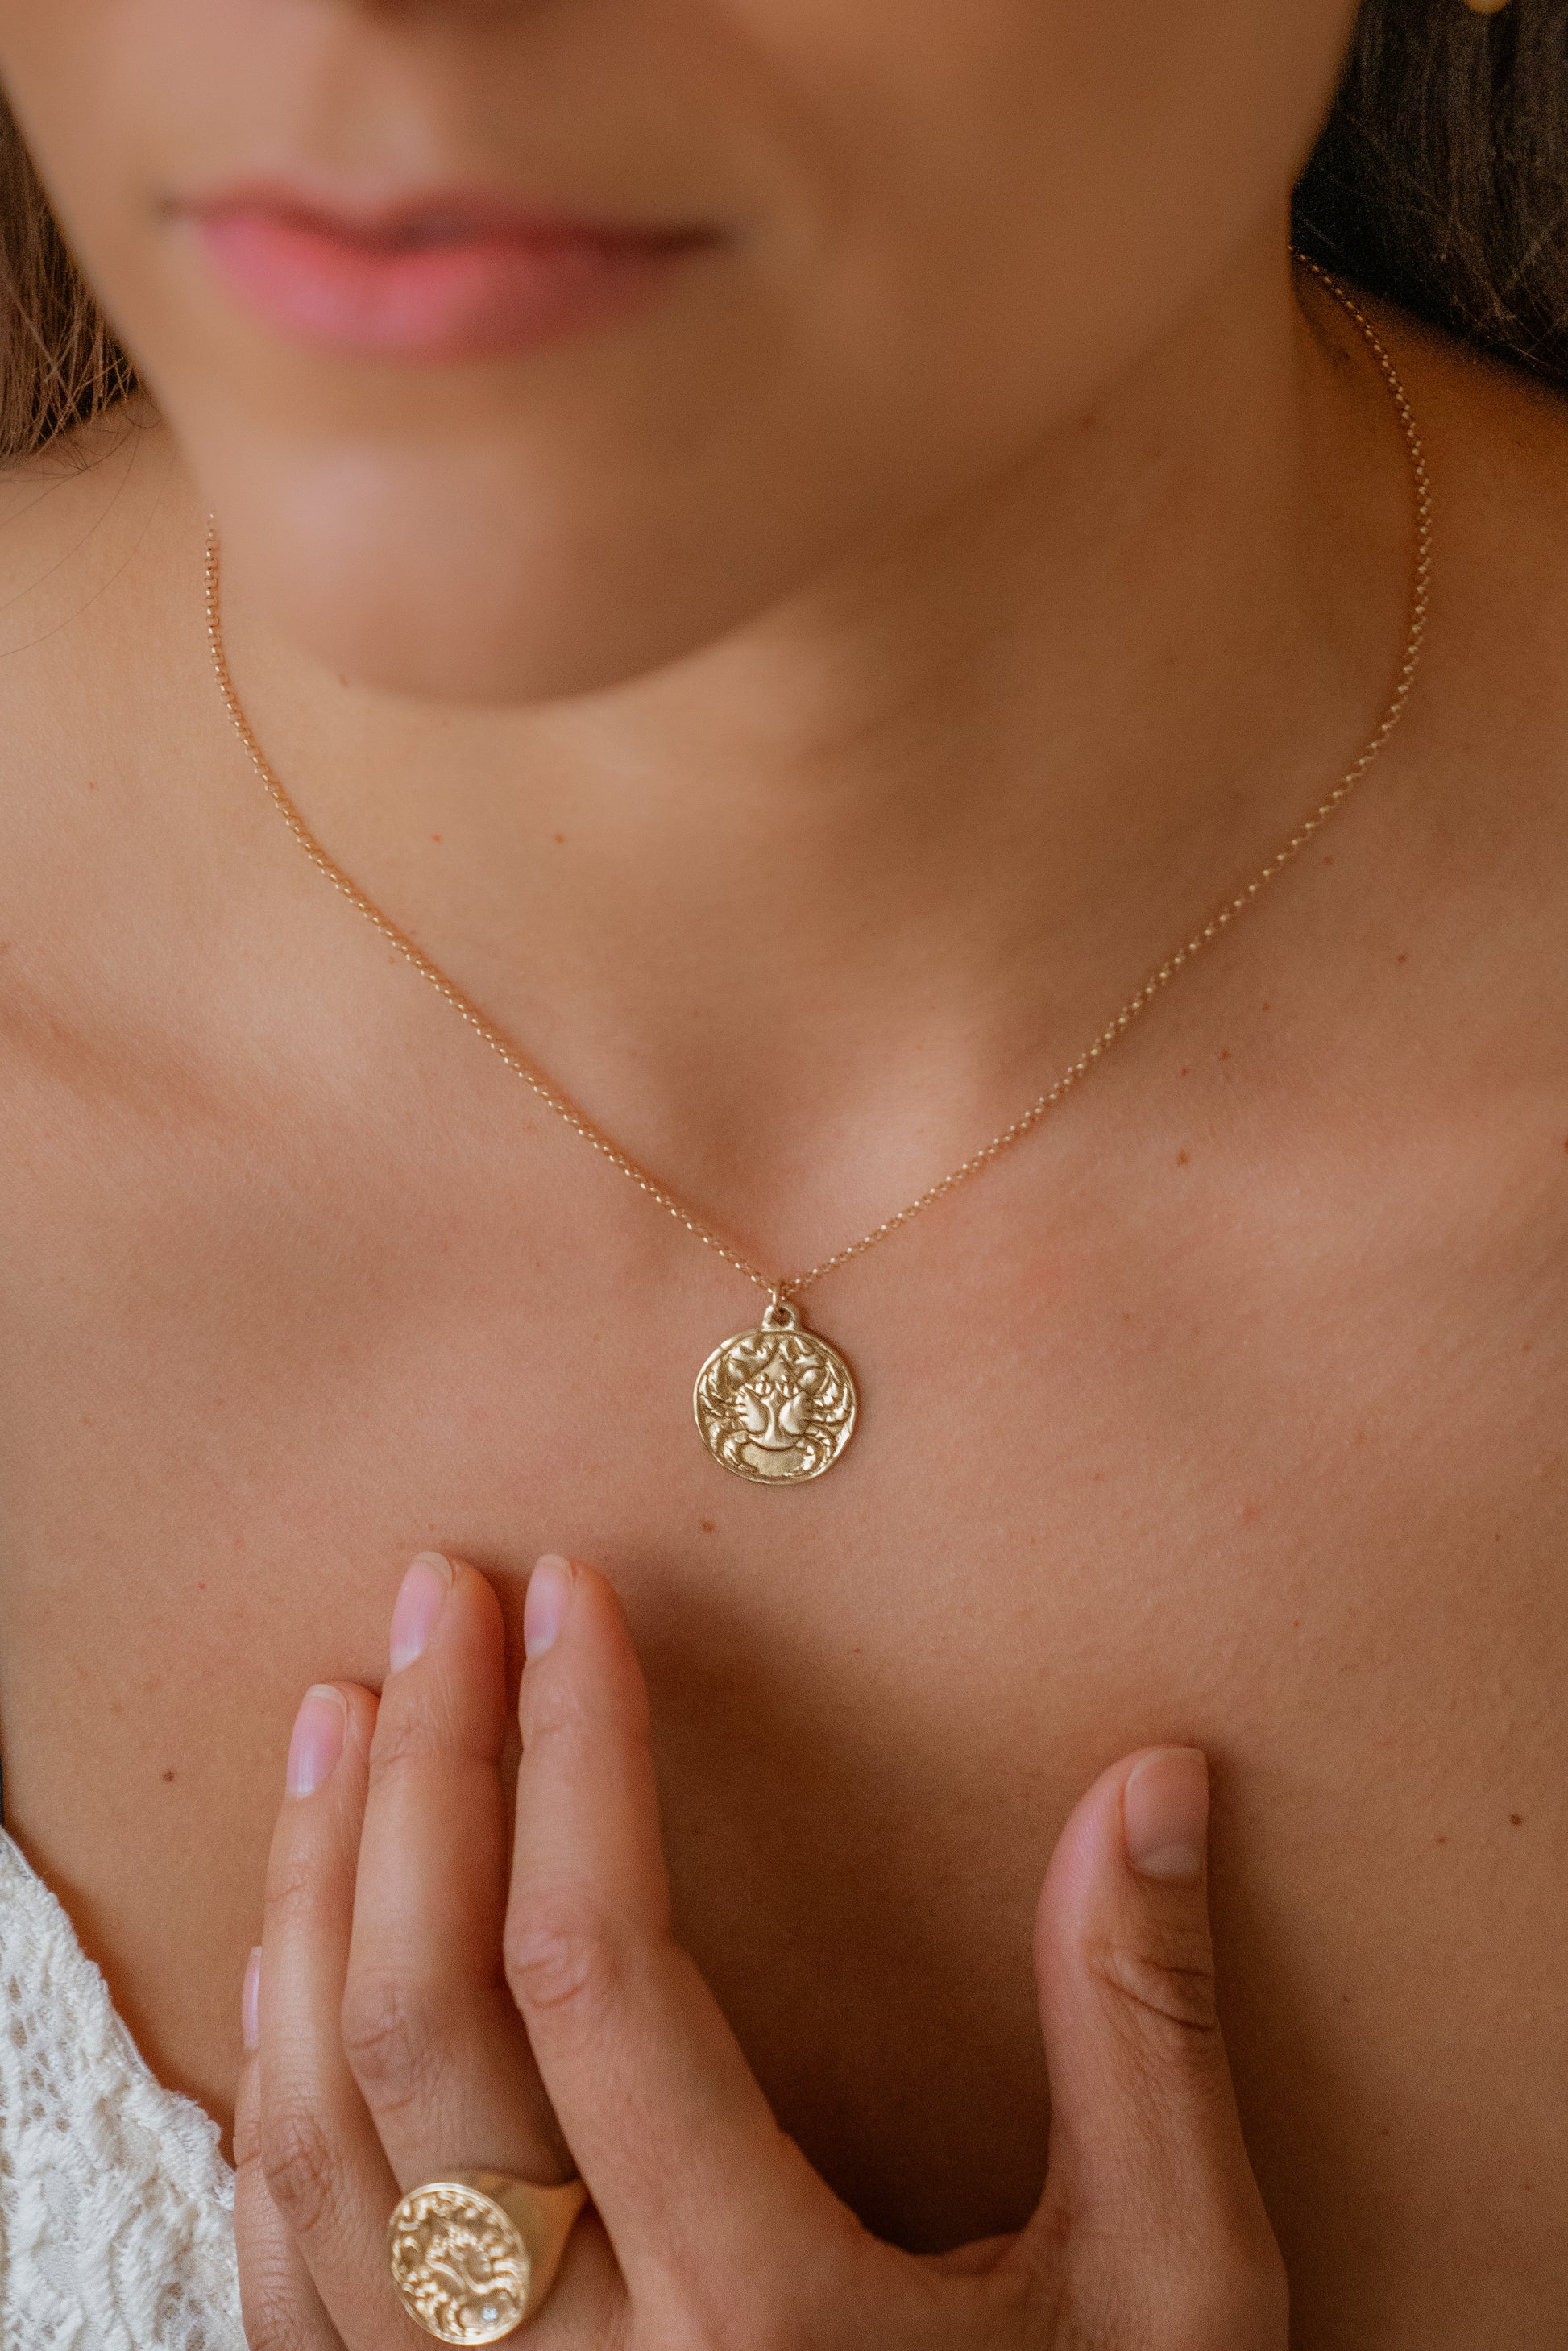 The fourth sign of the Zodiac, water sign Cancer is deeply intuitive, dedicated to their family and protective of their home. A hand-carved crab with resplendent pincers creates a necklace that captures the power of the celestial sky.